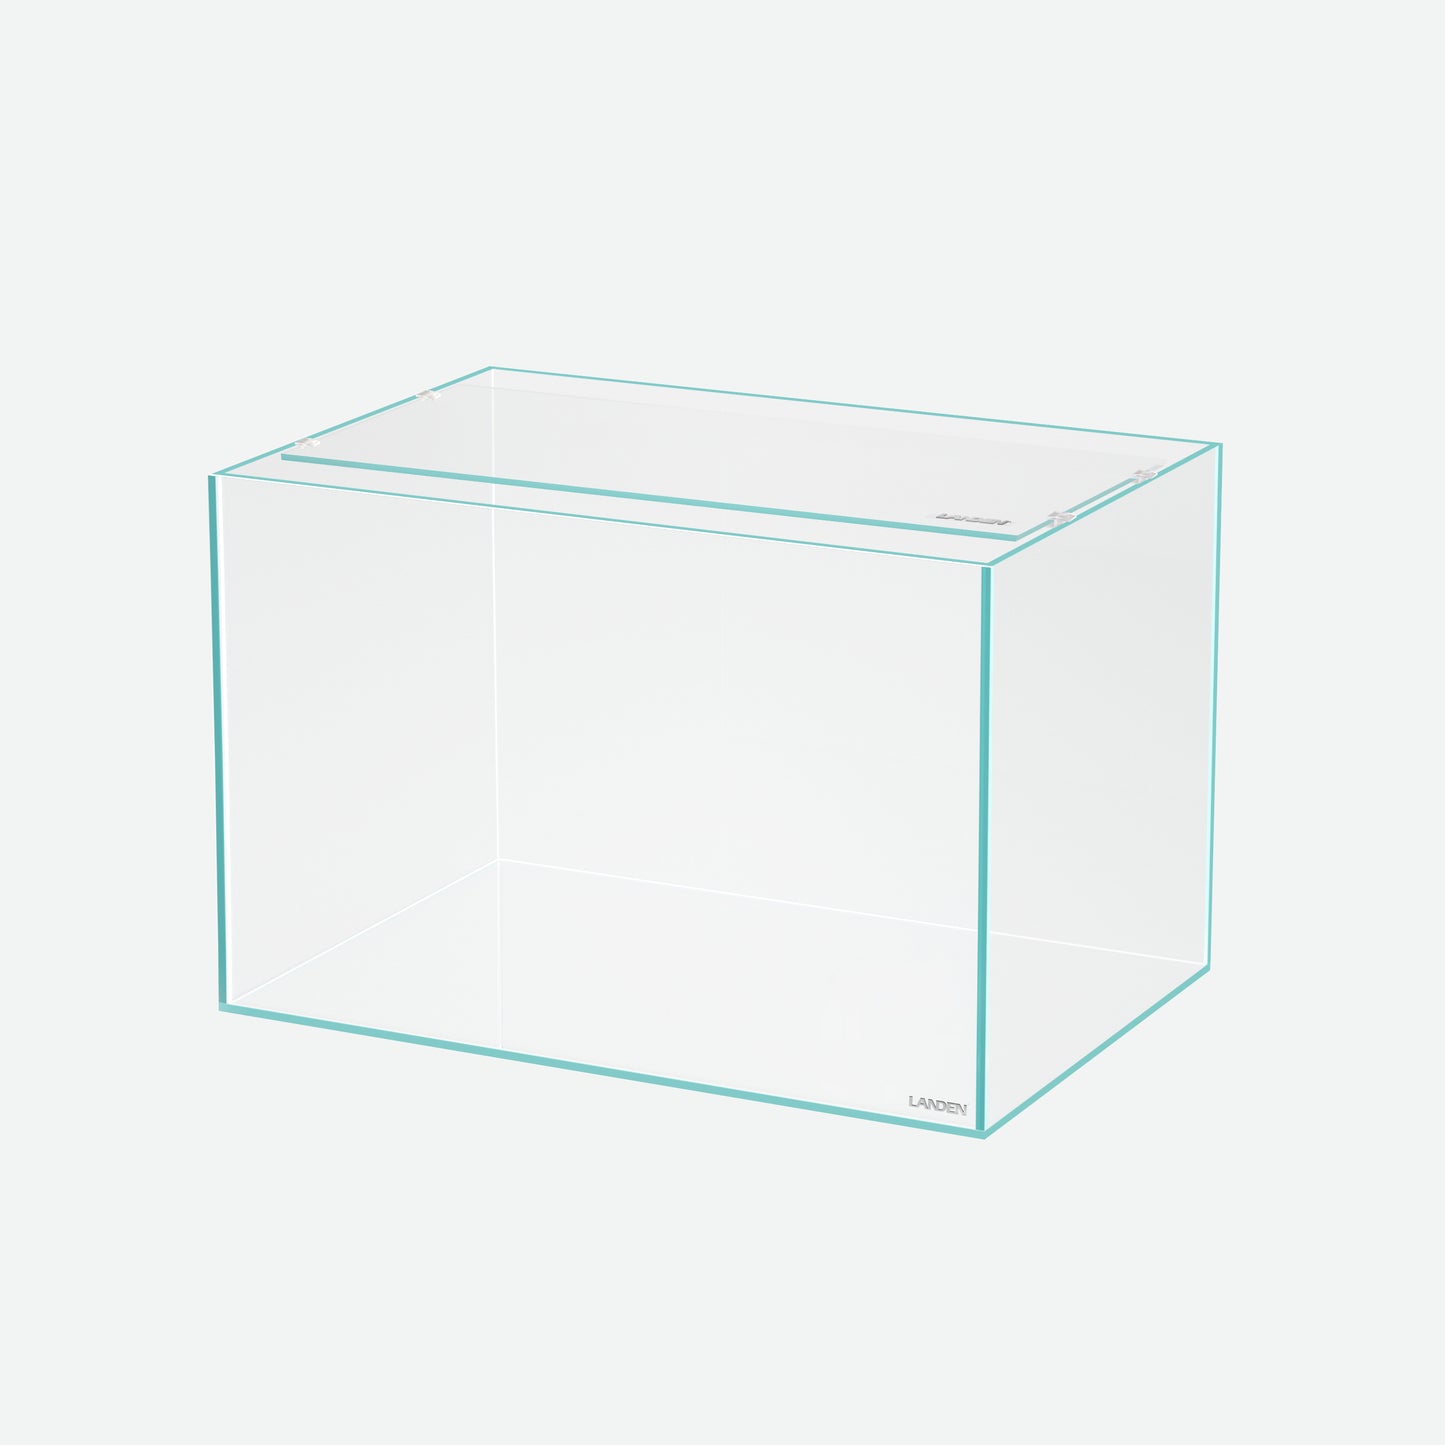 LANDEN 4mm Thick Clear Glass Aquarium Lid, Includes 4 Clips for Secure Placement, 432 X 230mm(17.01x9.06 inches) Adapted to SD453030,ARF45